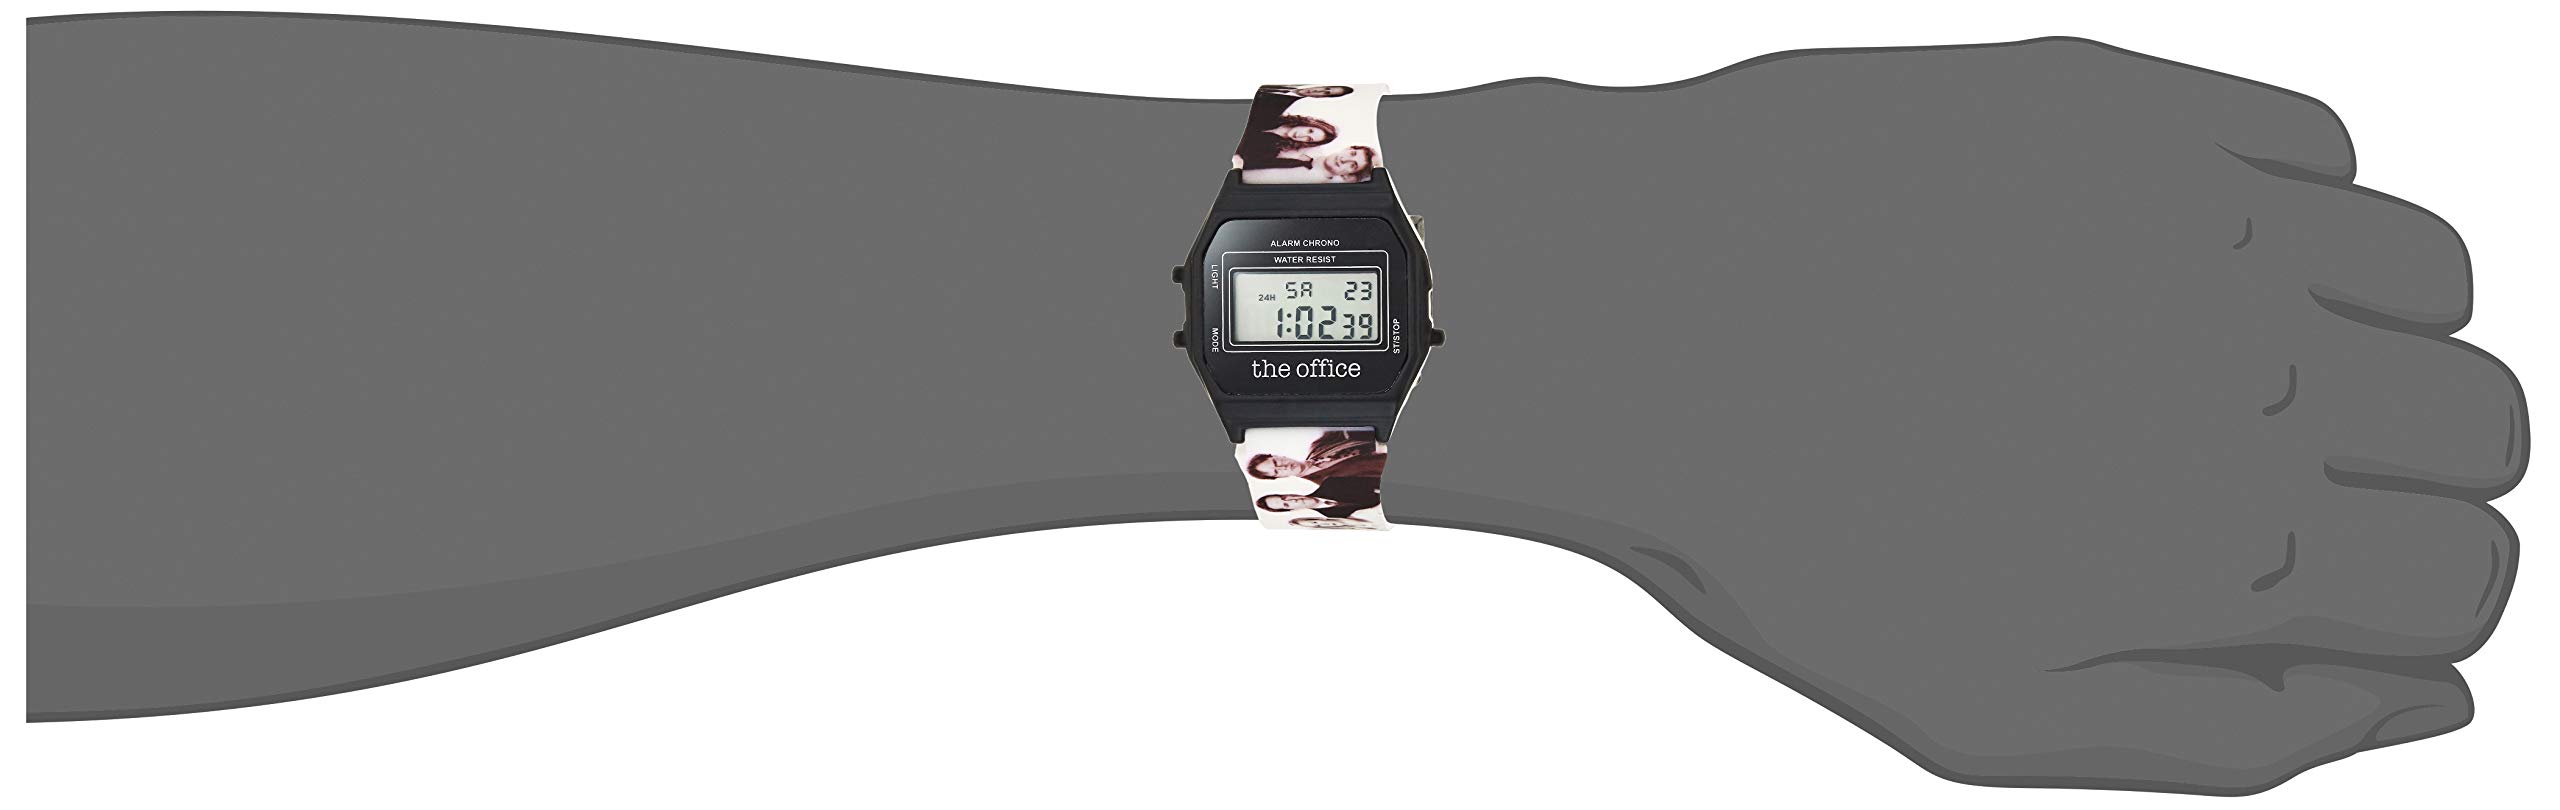 Accutime The Office Quartz Unisex Watch - Men and Women Watch - Digital Inddor/Outdoor Watch, LCD Display Face Dial, The Office Cast of Characters Printed on Black Watch Band